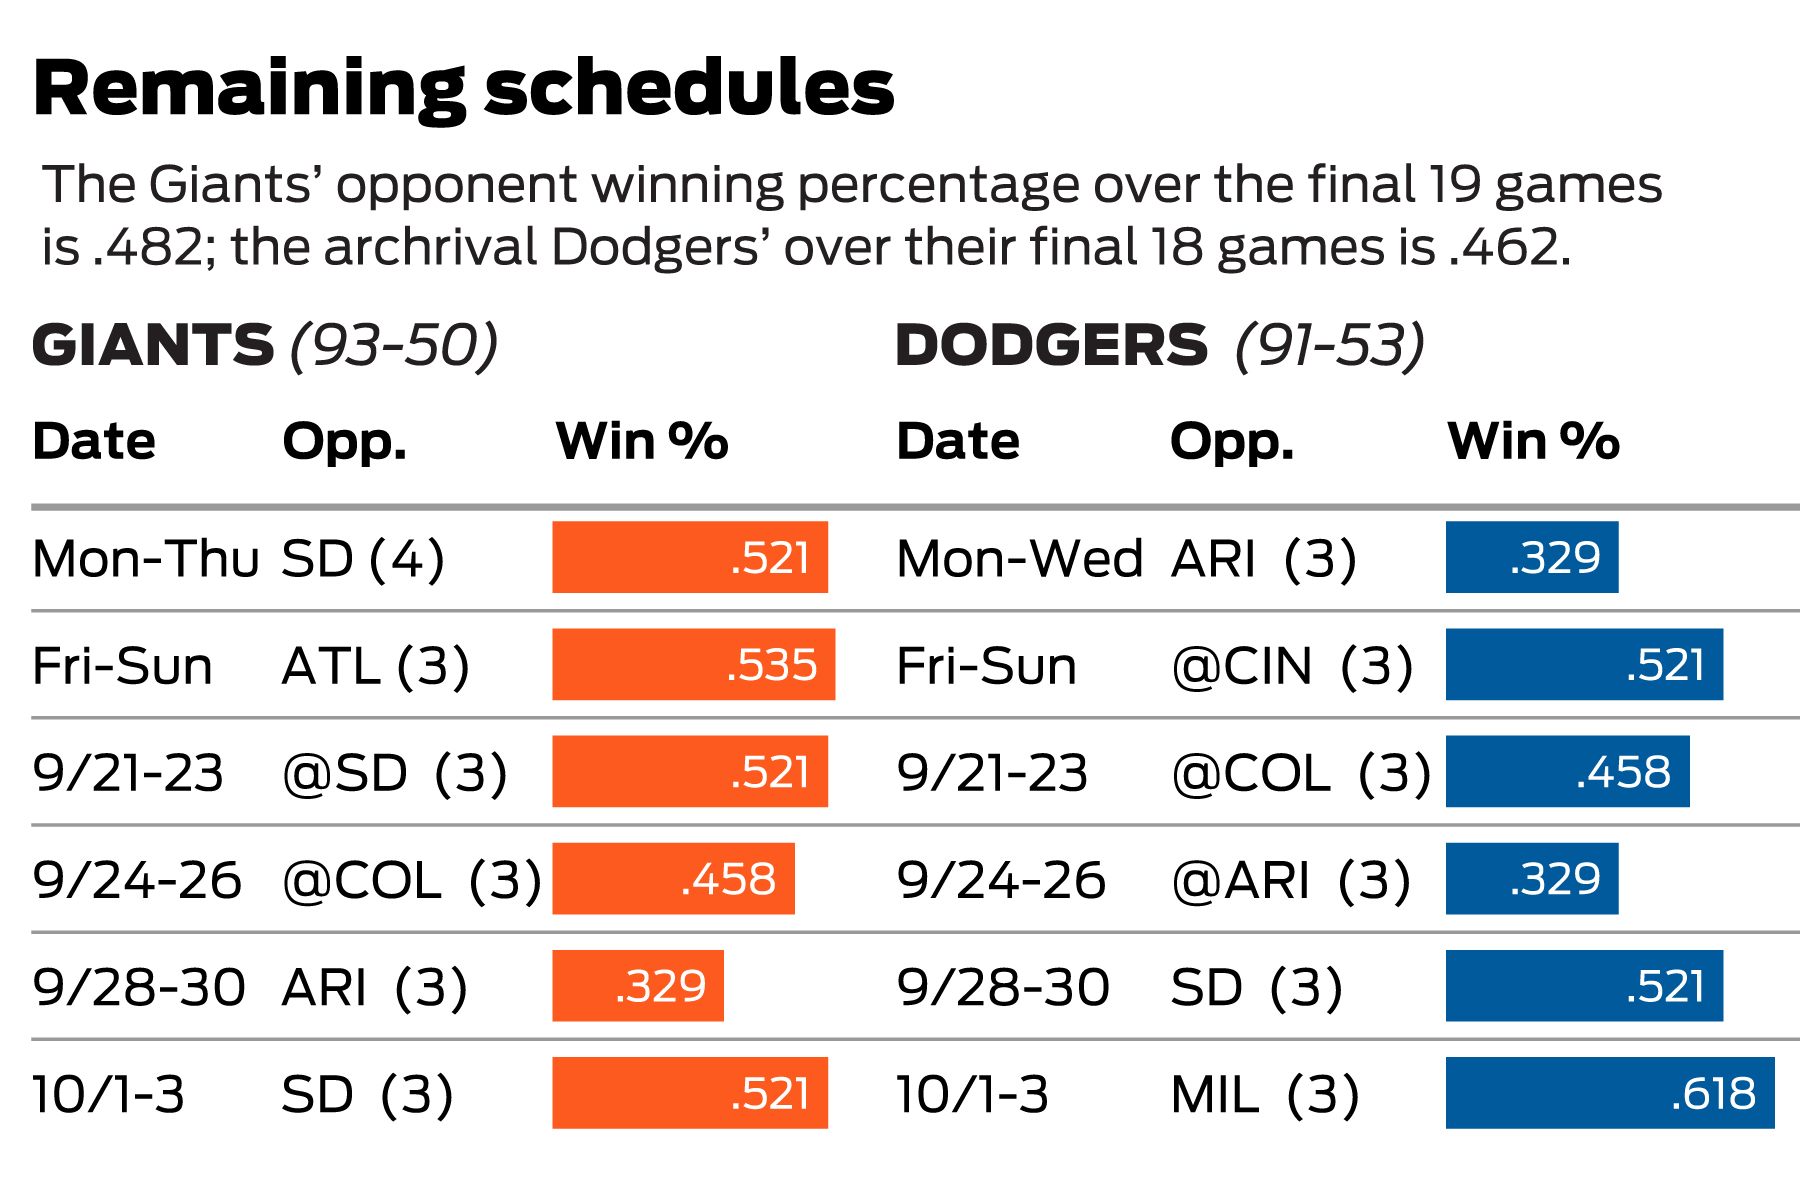 Giants vs. Dodgers Breaking down their remaining schedules